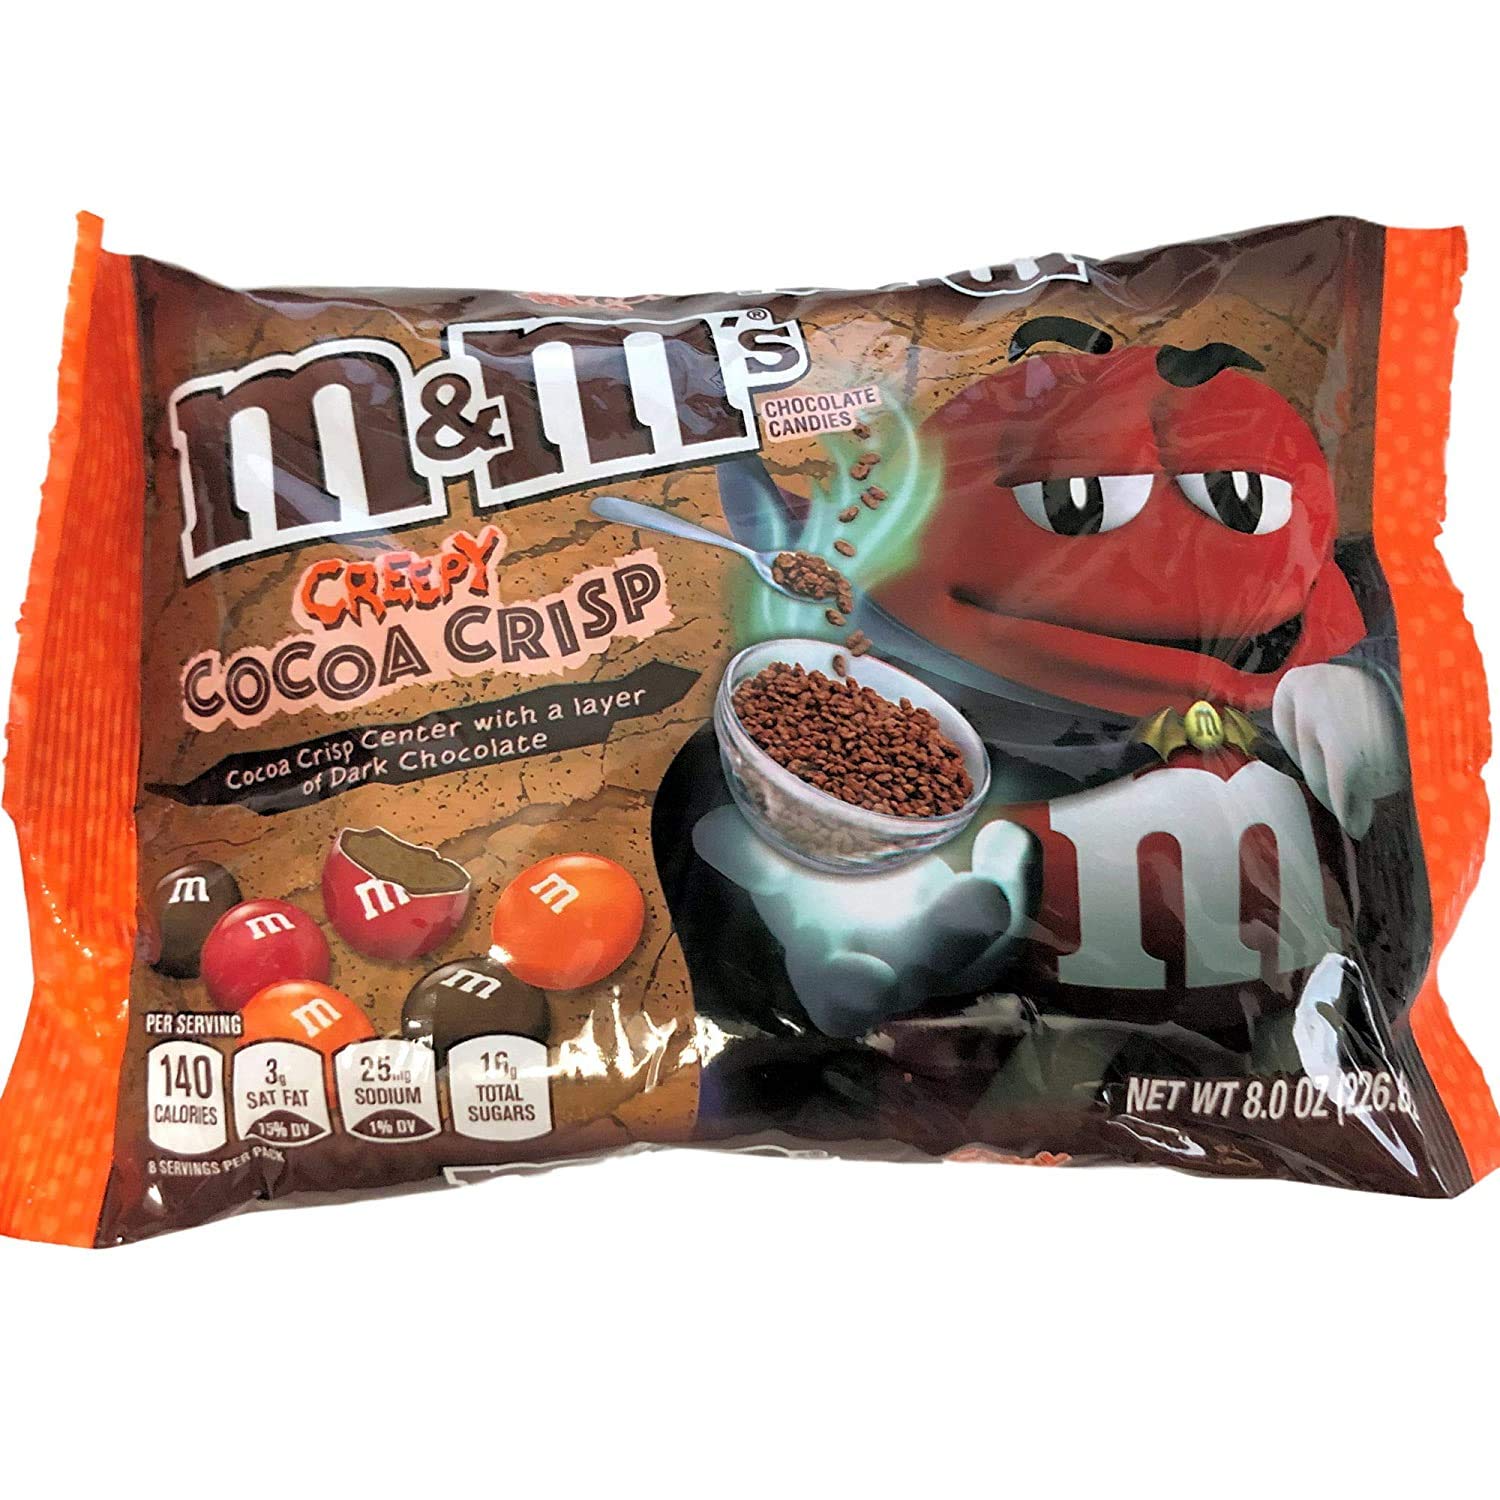 These 3 New Seasonal M&M's Flavors Look Berry, Berry Sweet